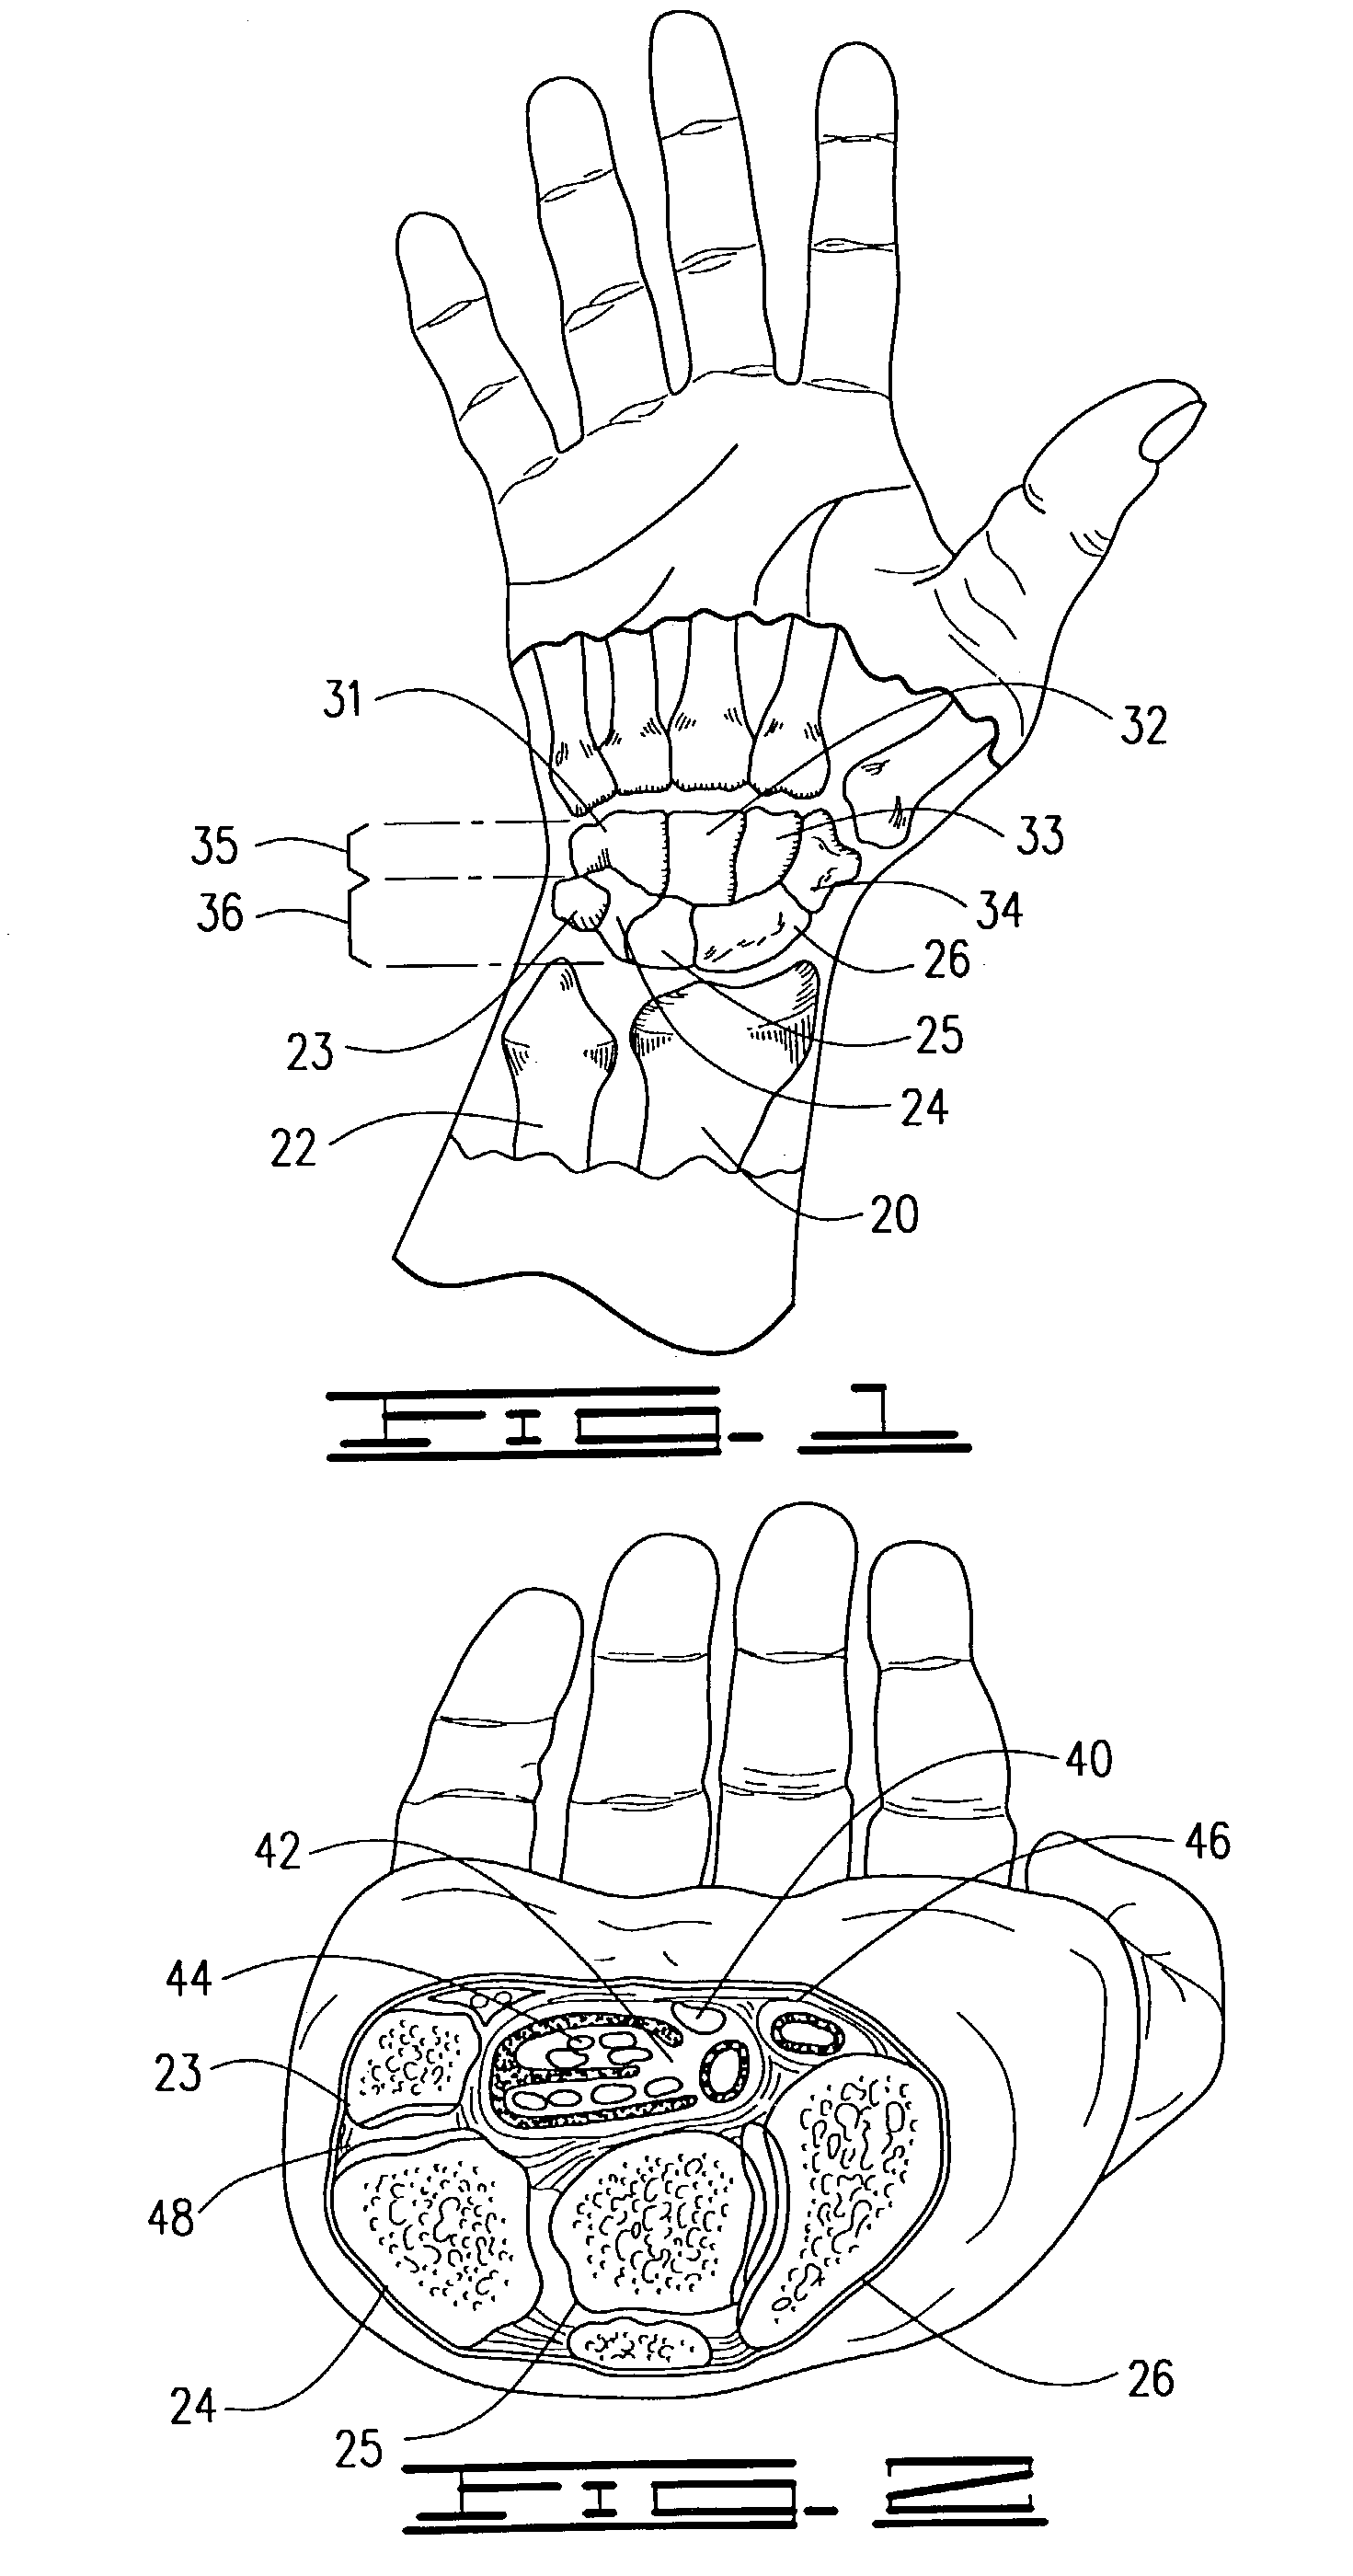 Co-dynamic adjustable orthotic appliance for carpal tunnel syndrome